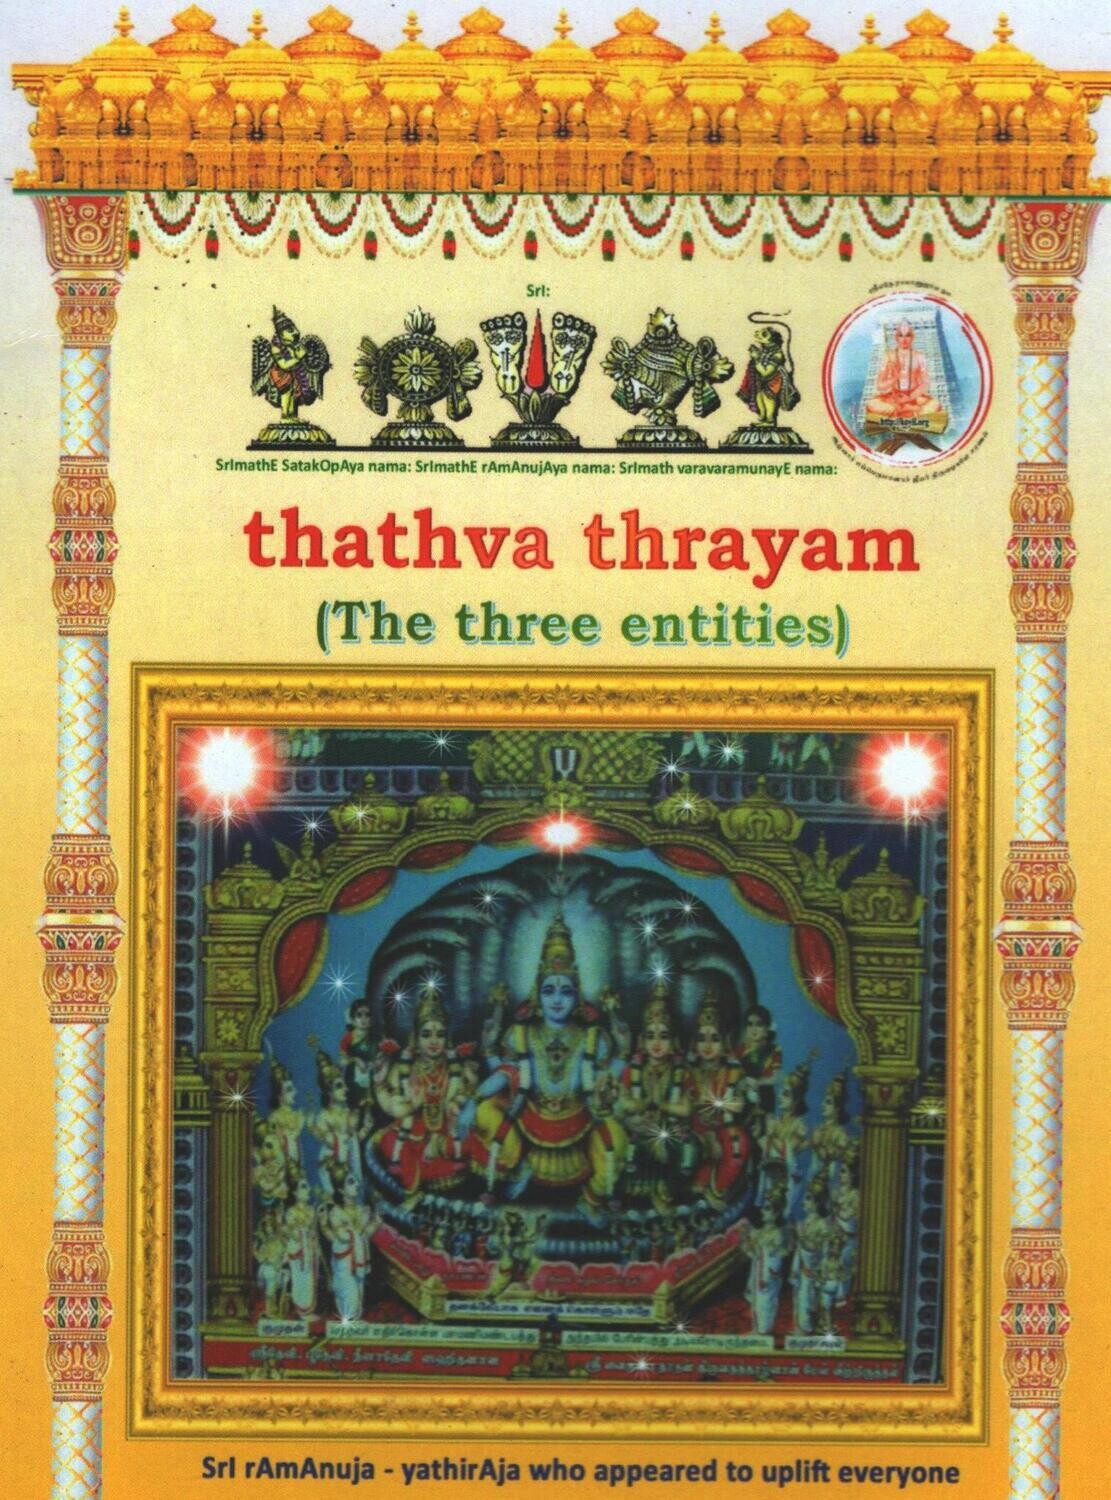 Printed Book Demy 1/8 size - Tattvatrayam/Thathvathrayam meanings in simple English.